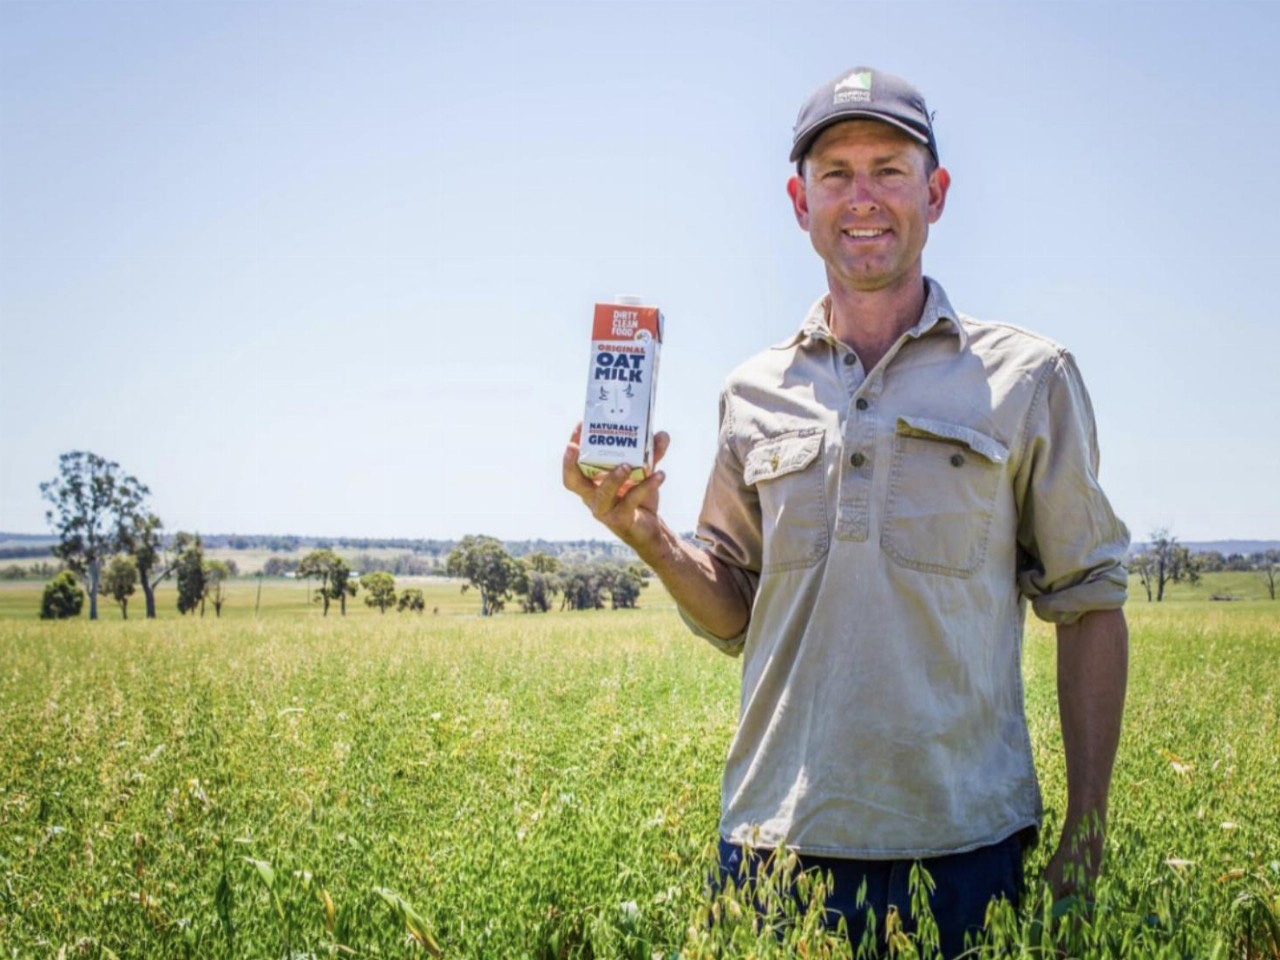 Wide-Open-Agriculture-Oat-Milk